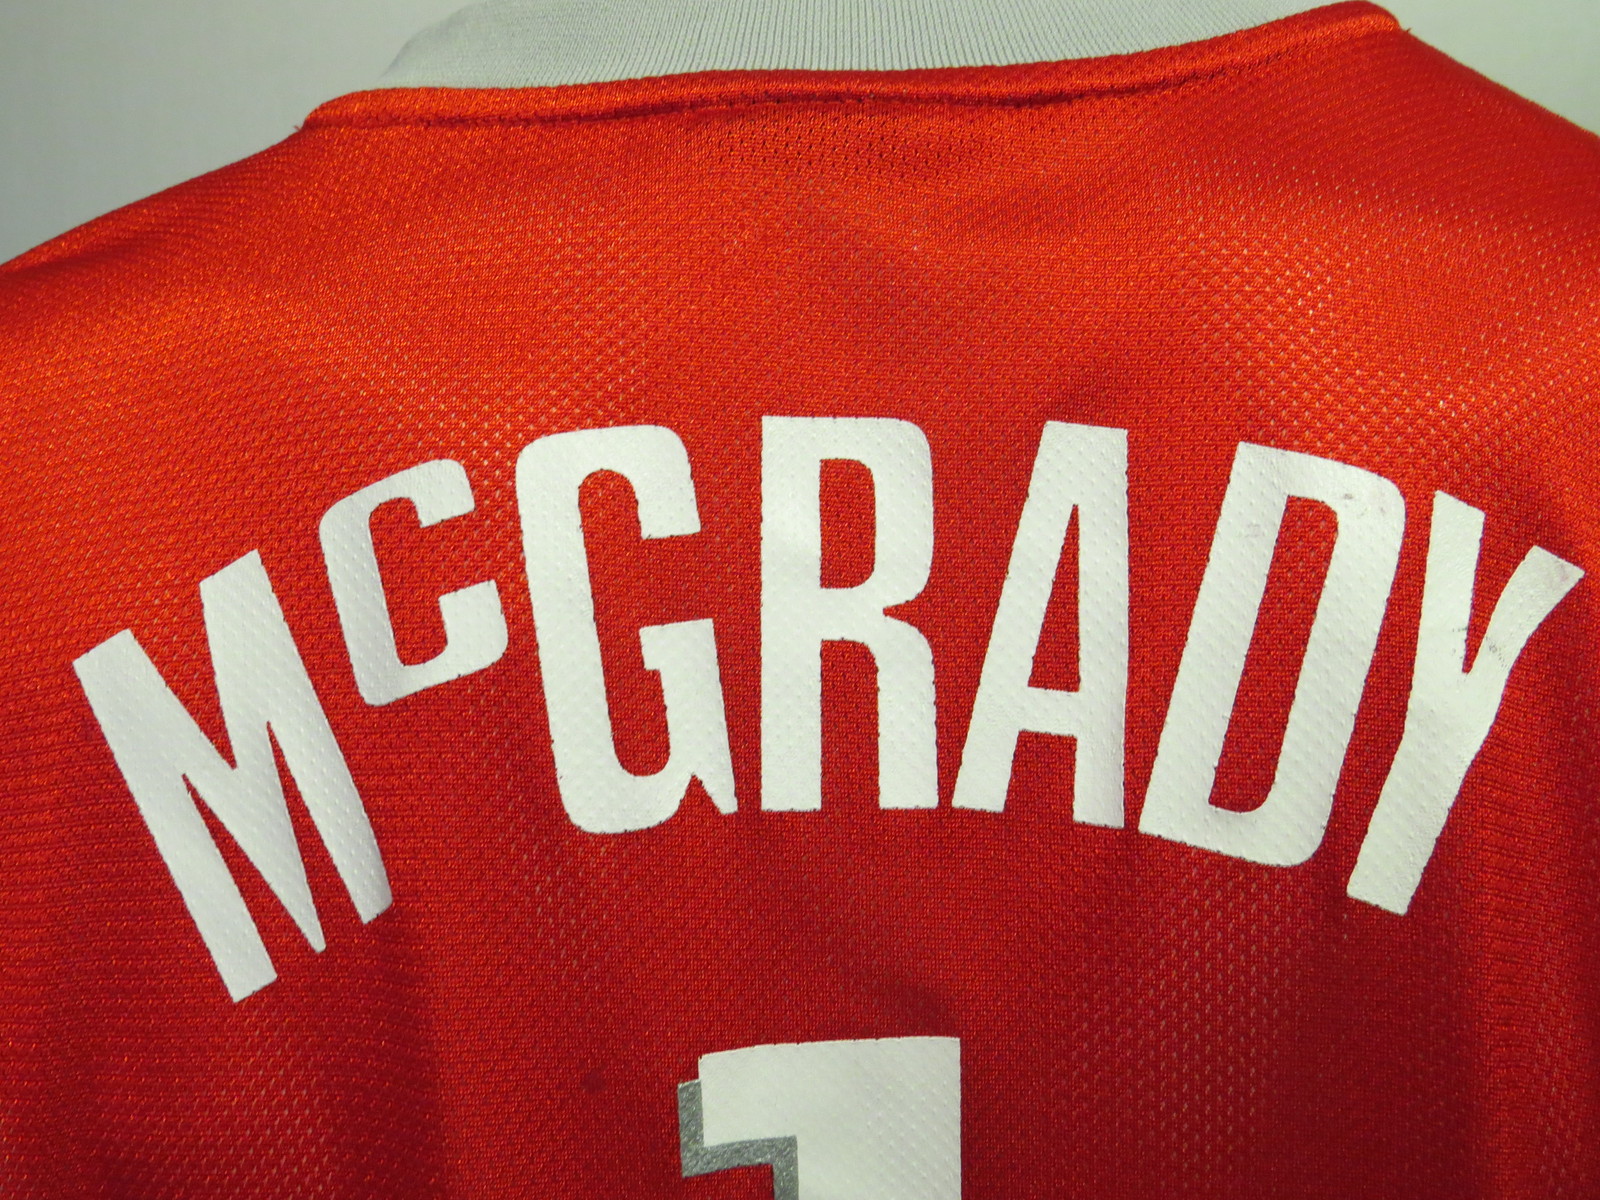 AntiqueologyToday Tracy McGrady Houston Rockets #1 Jersey - Size Youth S (8) - NOS - Never Worn - Original Tag - Printed Name/Number - Reebok